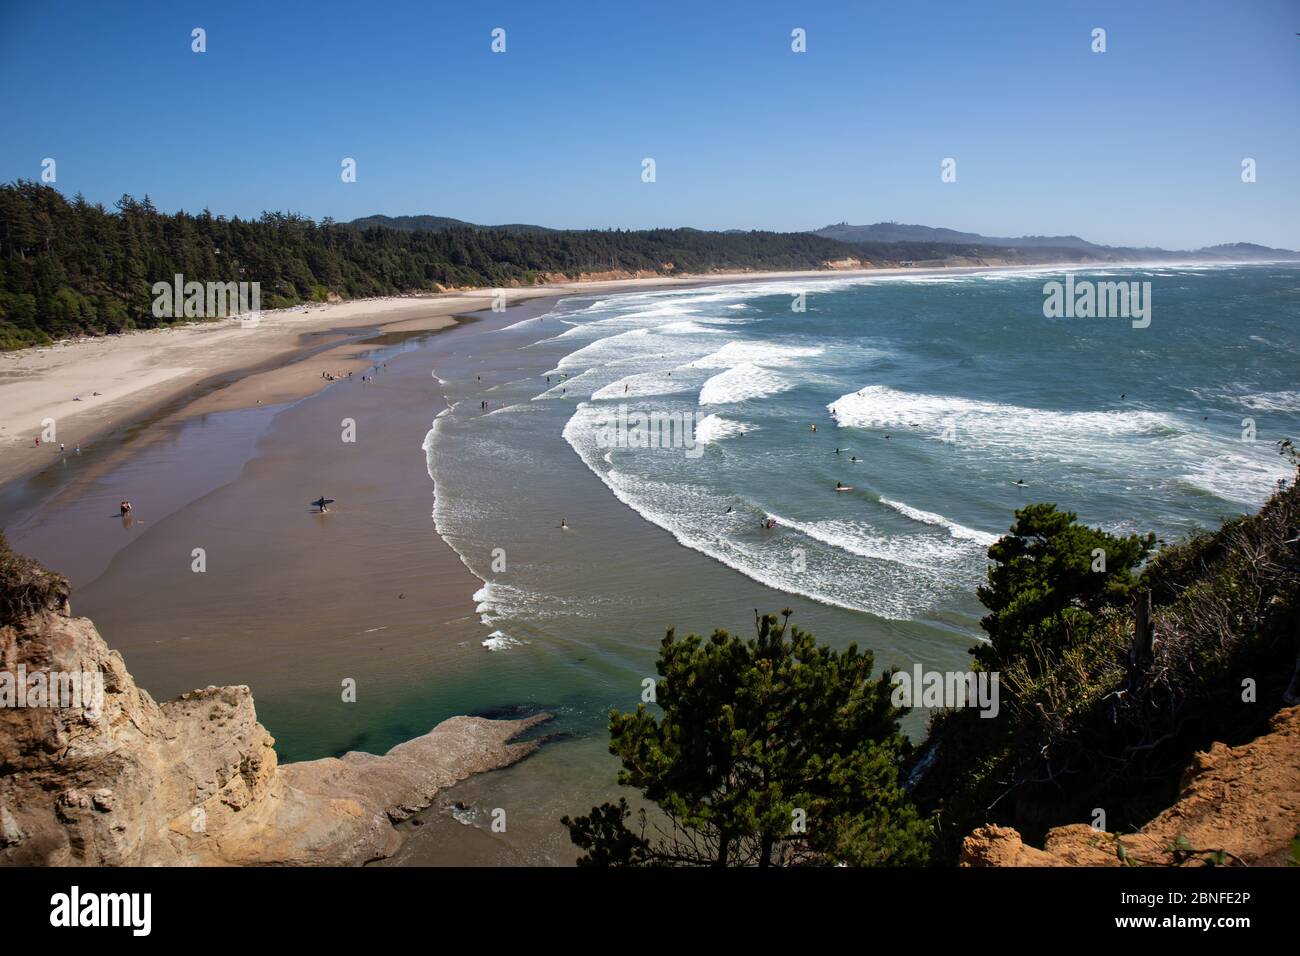 Otter Crest State Scenic Viewpoint bei Devils Punch Bowl, Otter Rock, Oregon im August Stockfoto